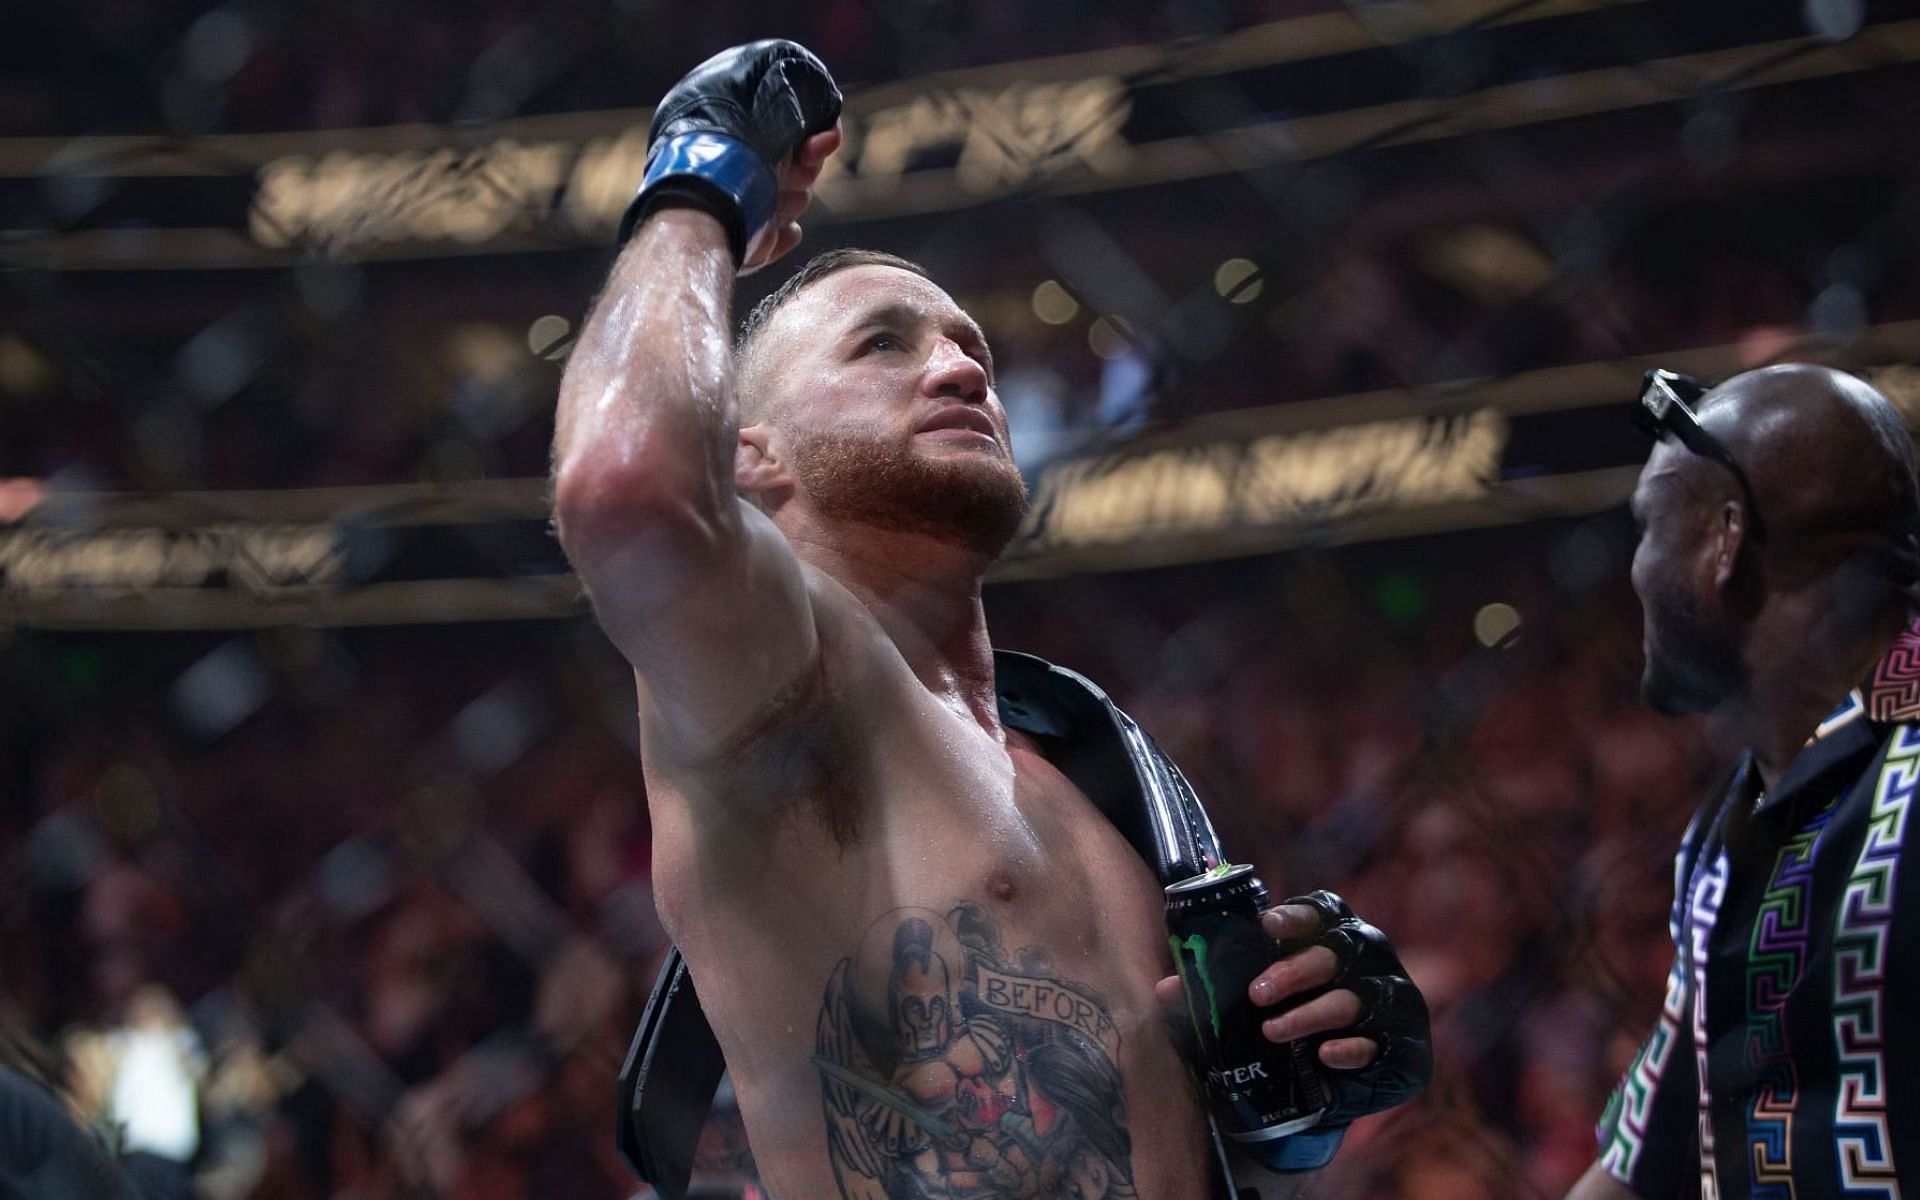 After last night, Justin Gaethje should be given a lightweight title shot